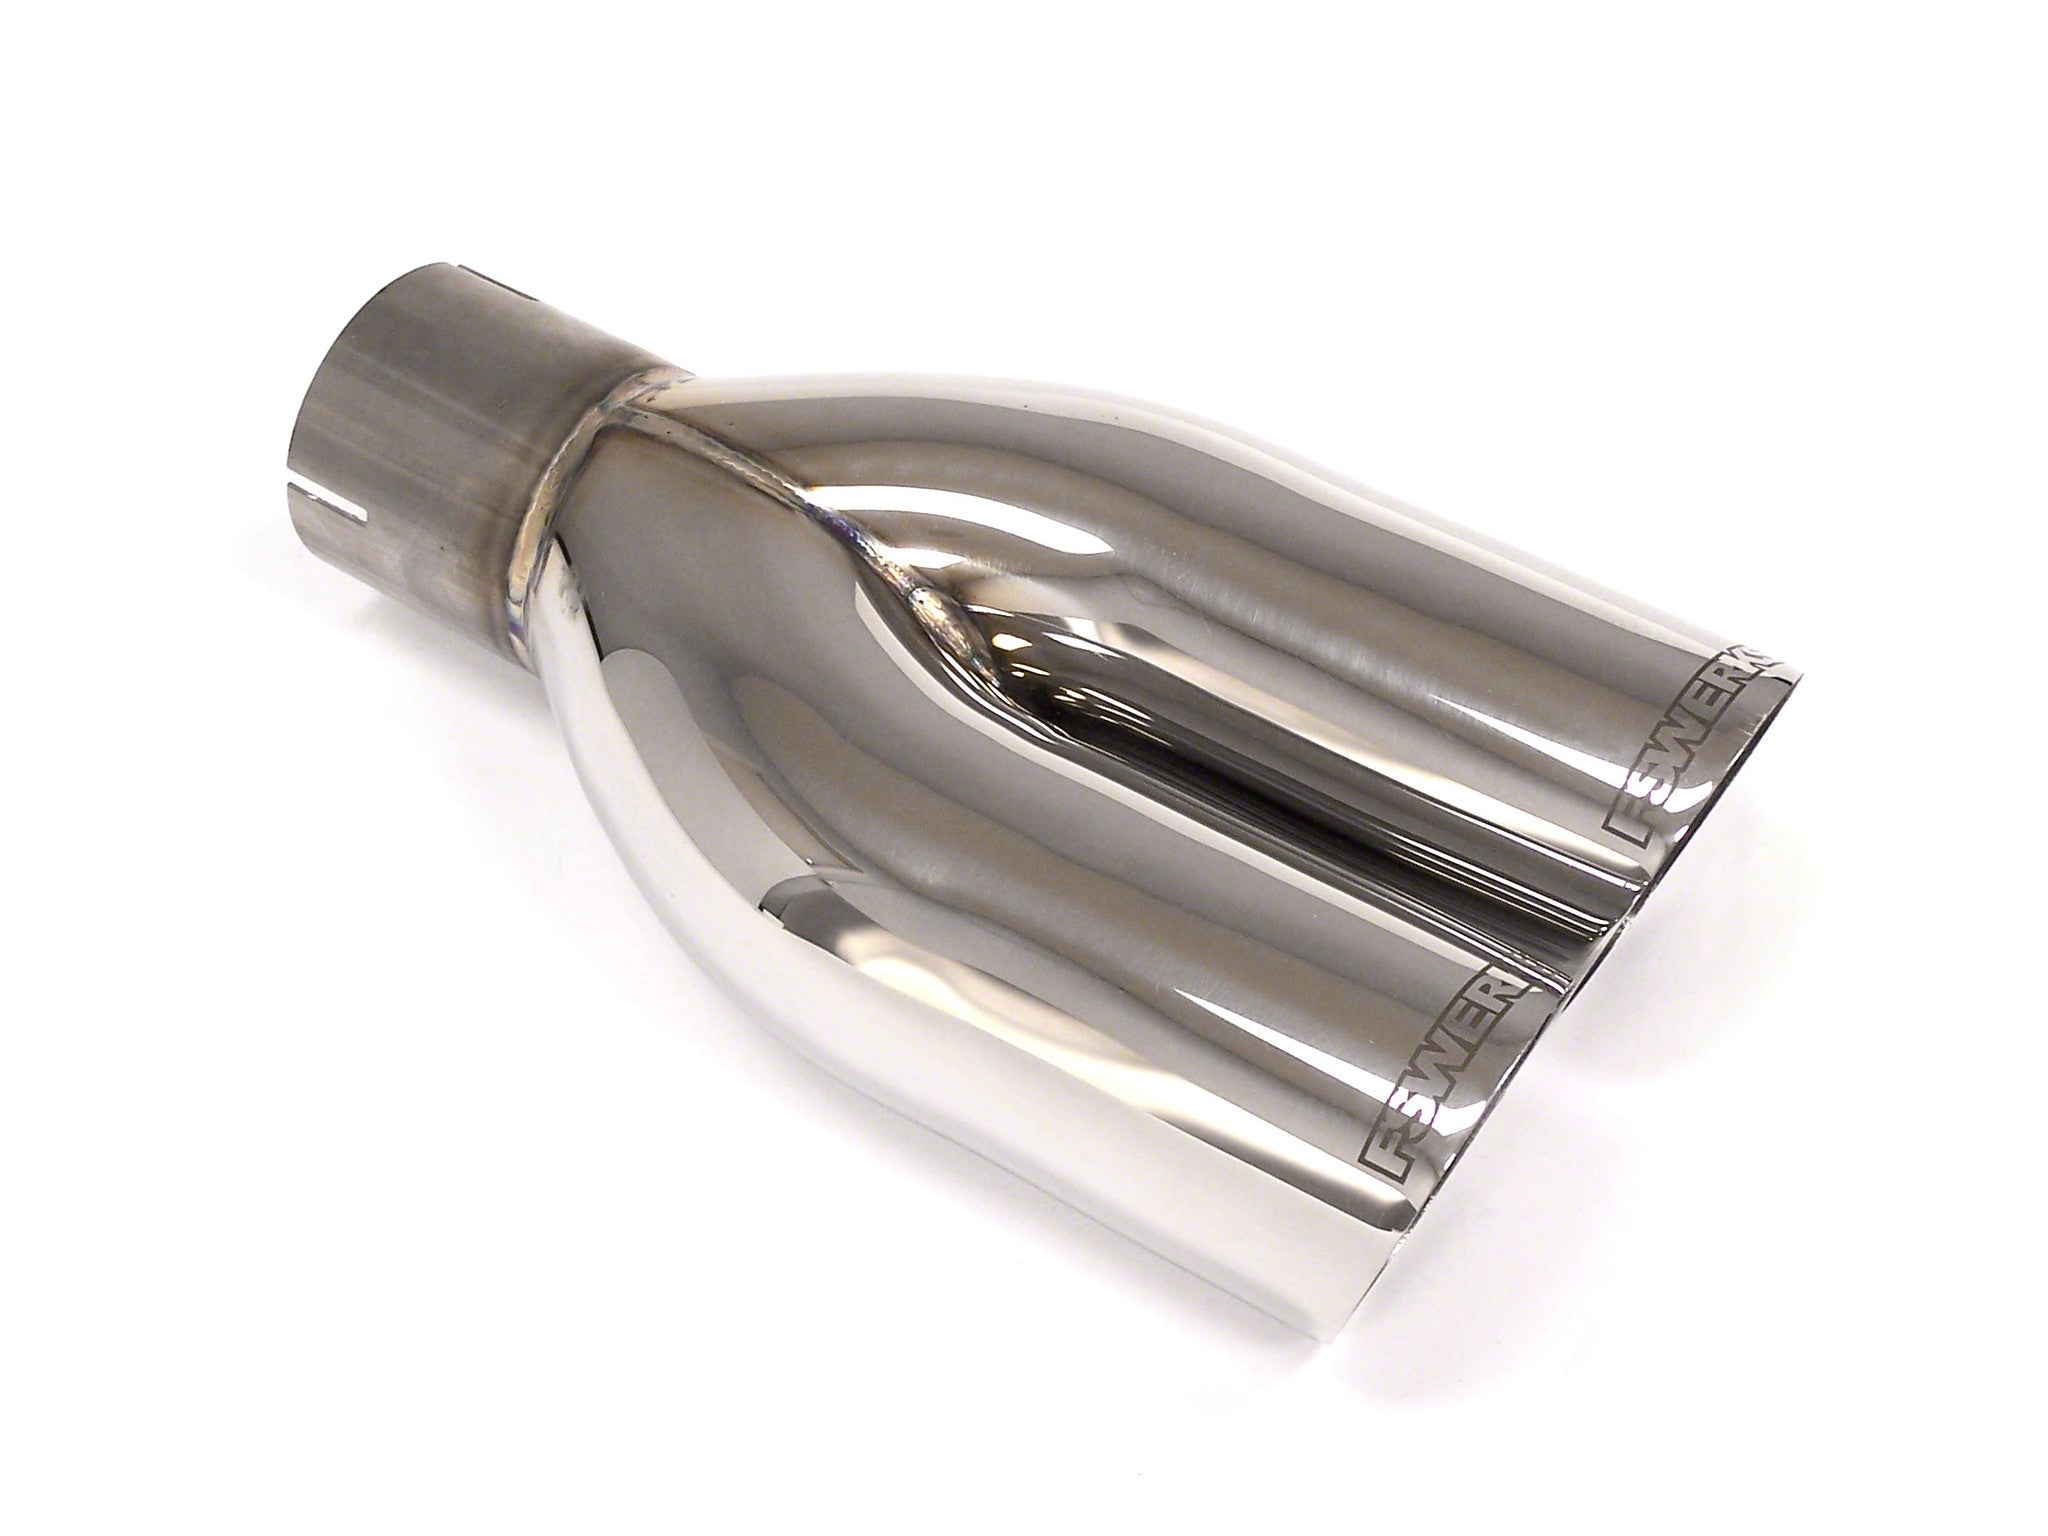 FSWERKS Stainless Steel Exhaust Tip - Single or Dual Angle Cut